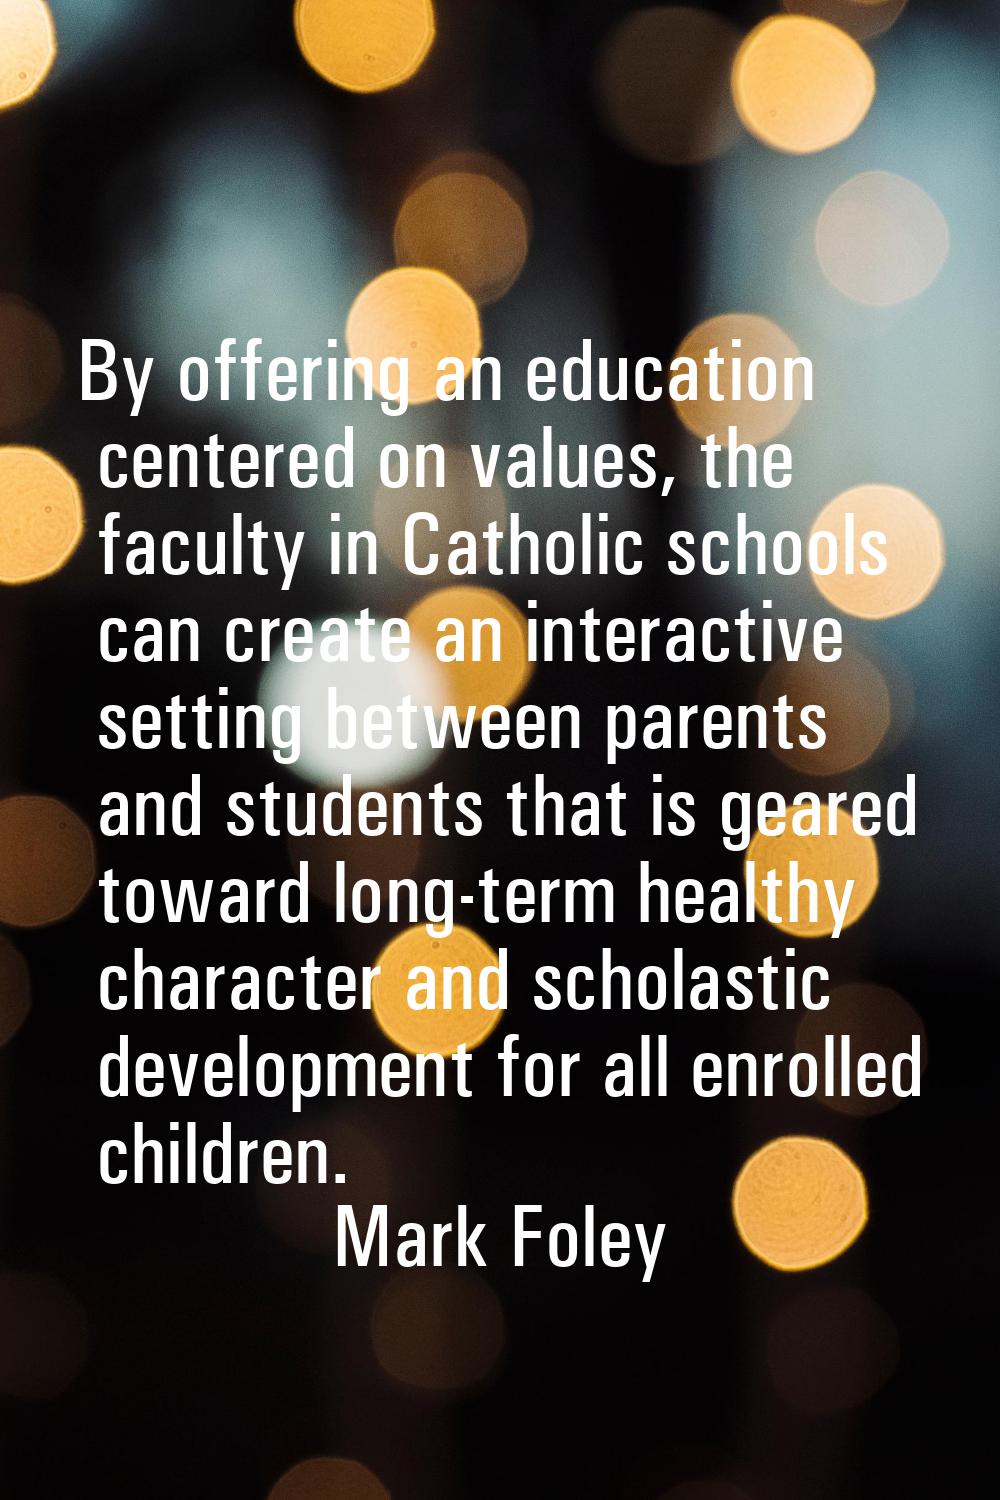 By offering an education centered on values, the faculty in Catholic schools can create an interact